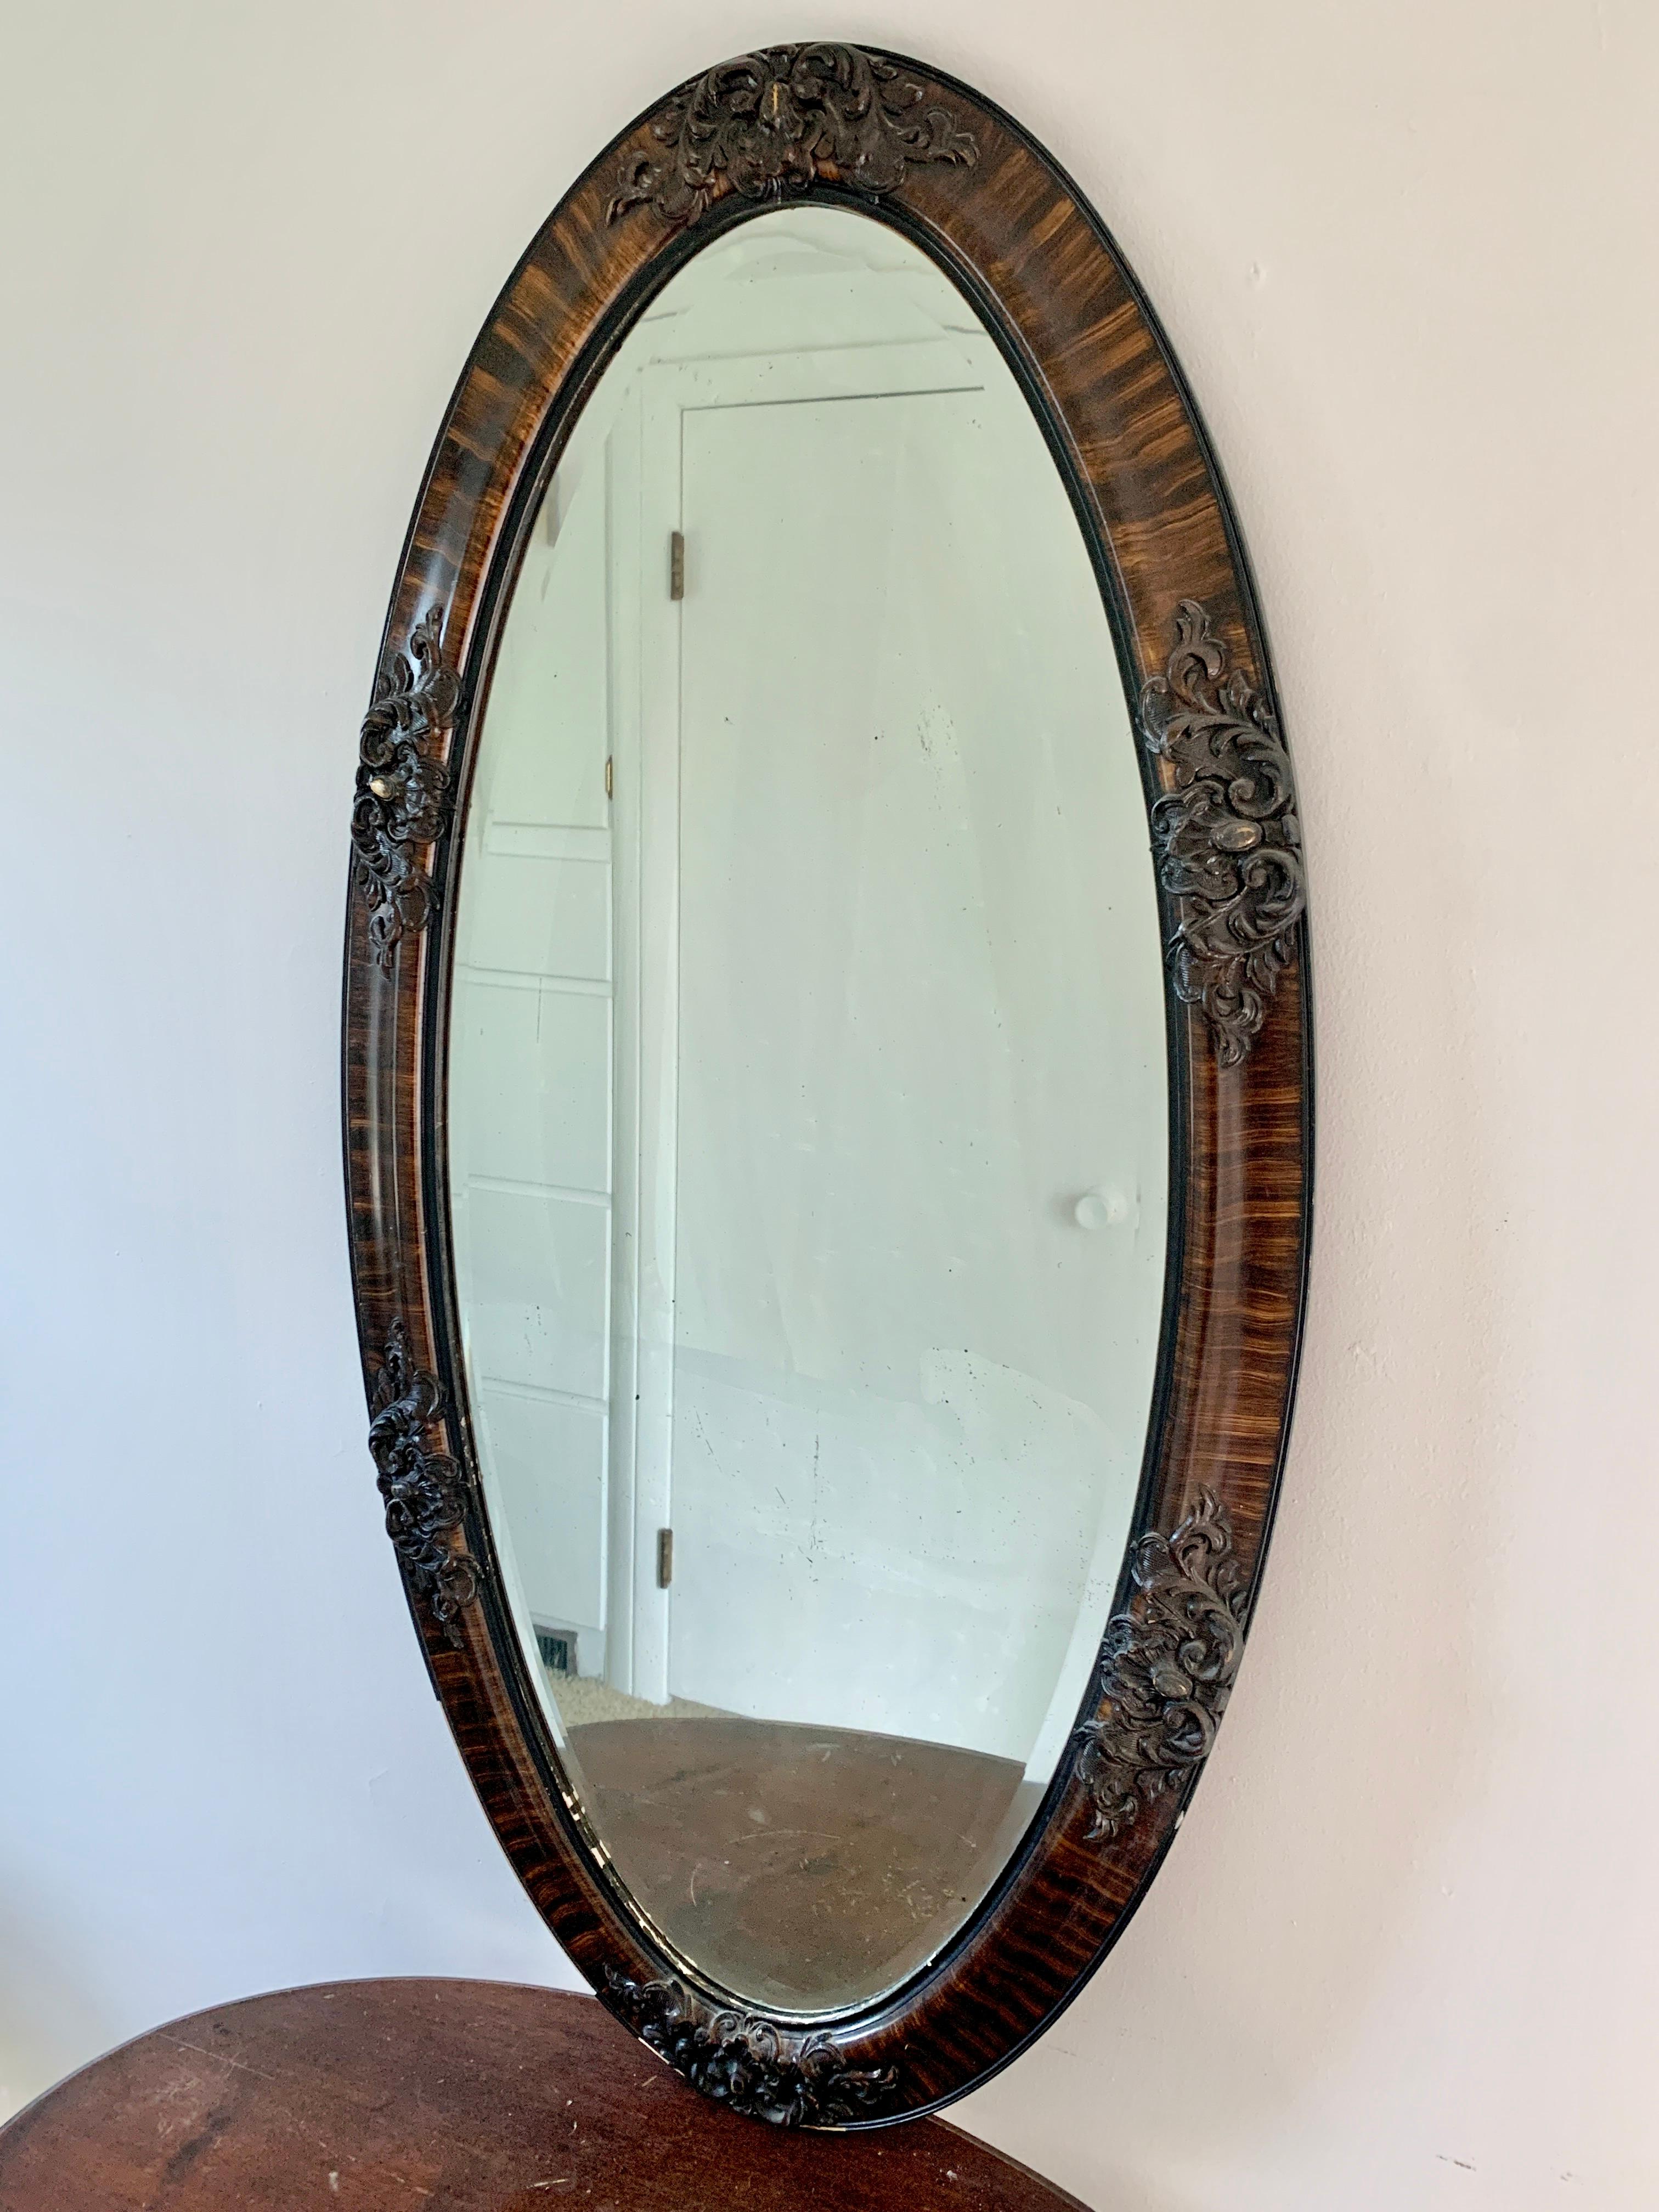 A gorgeous antique Victorian oval wall mirror with carved details

USA, circa Late 19th century

Carved tiger oak frame, with gold gilt details, and beveled antique mirror

Measures: 23